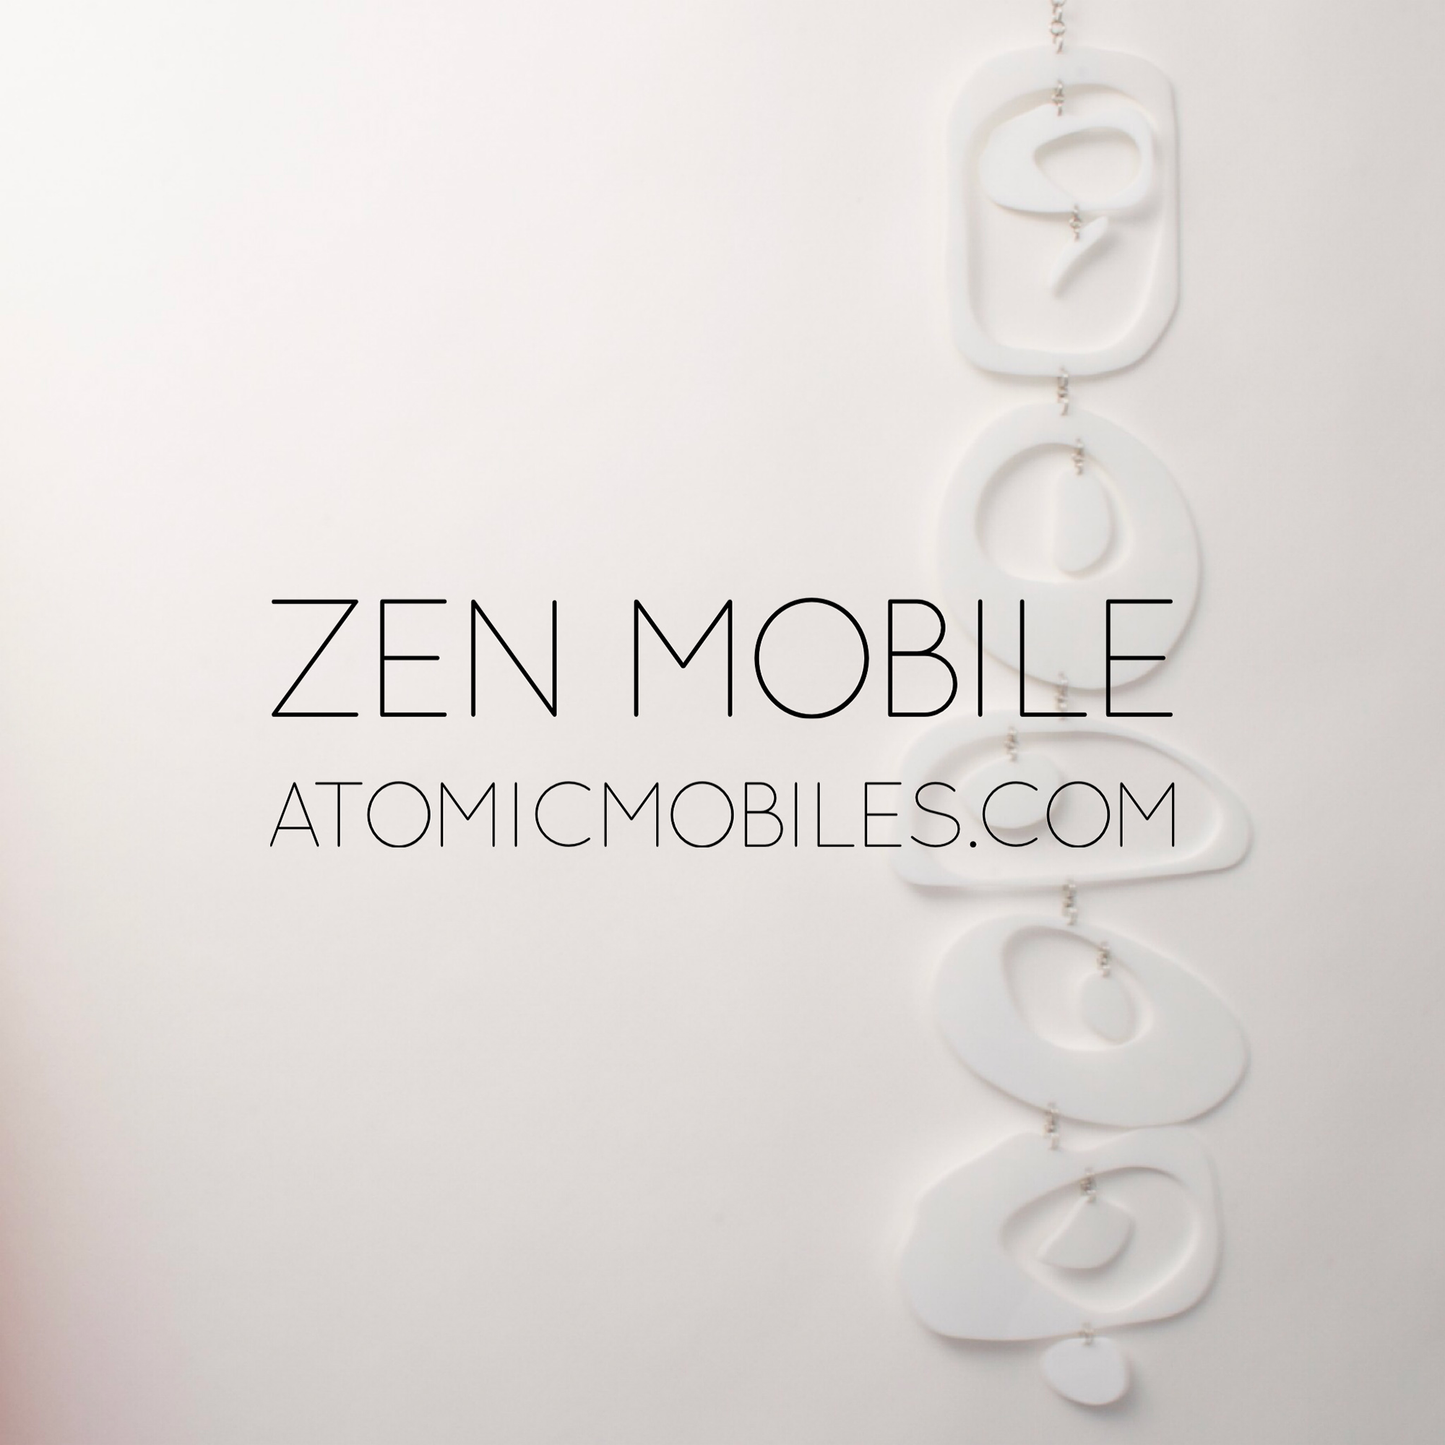 Zen Mobile in White by AtomicMobiles.com on white background - calm kinetic sculpture inspired by rock balancing